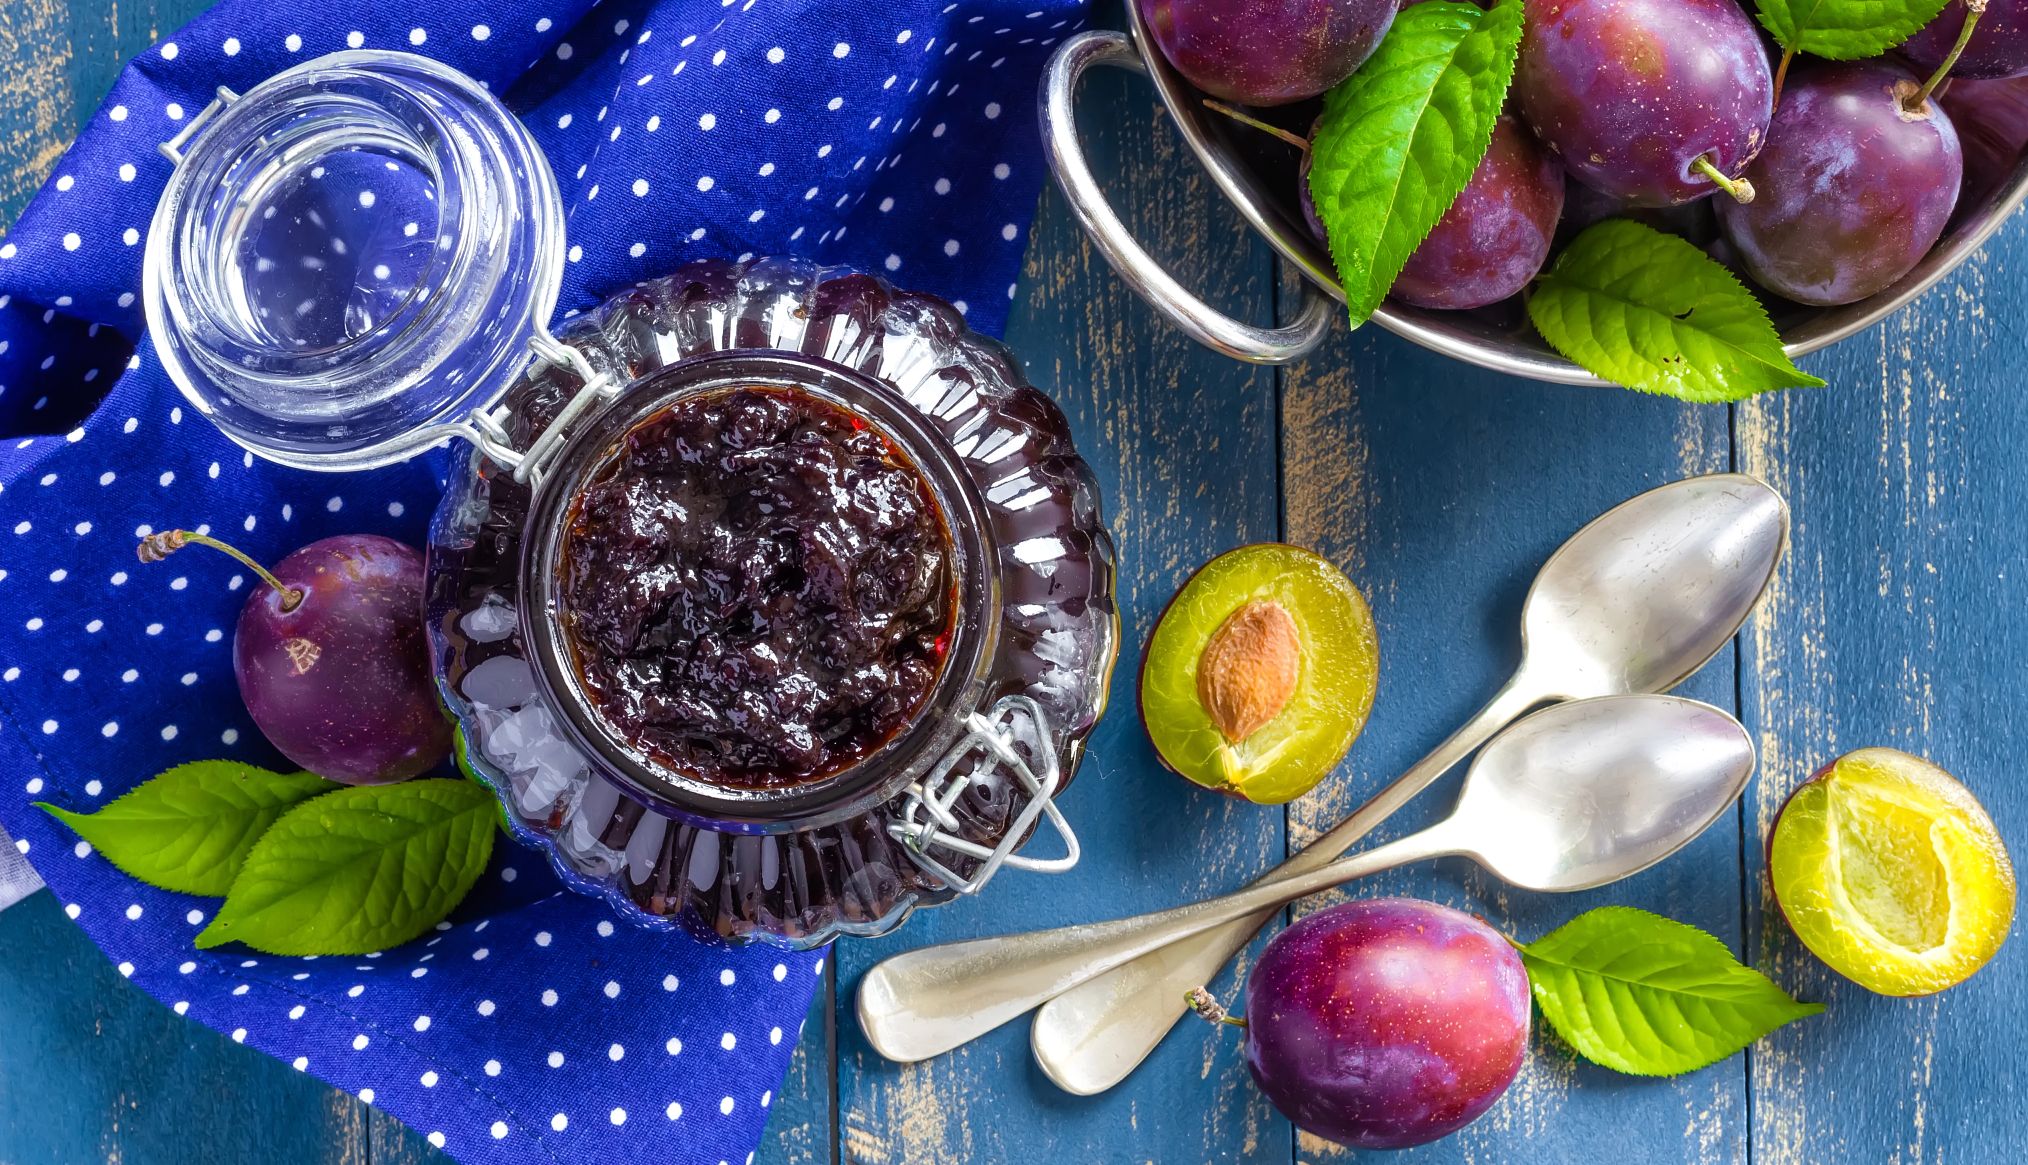 a jar of jam next to fresh prunes on a blue picnic table